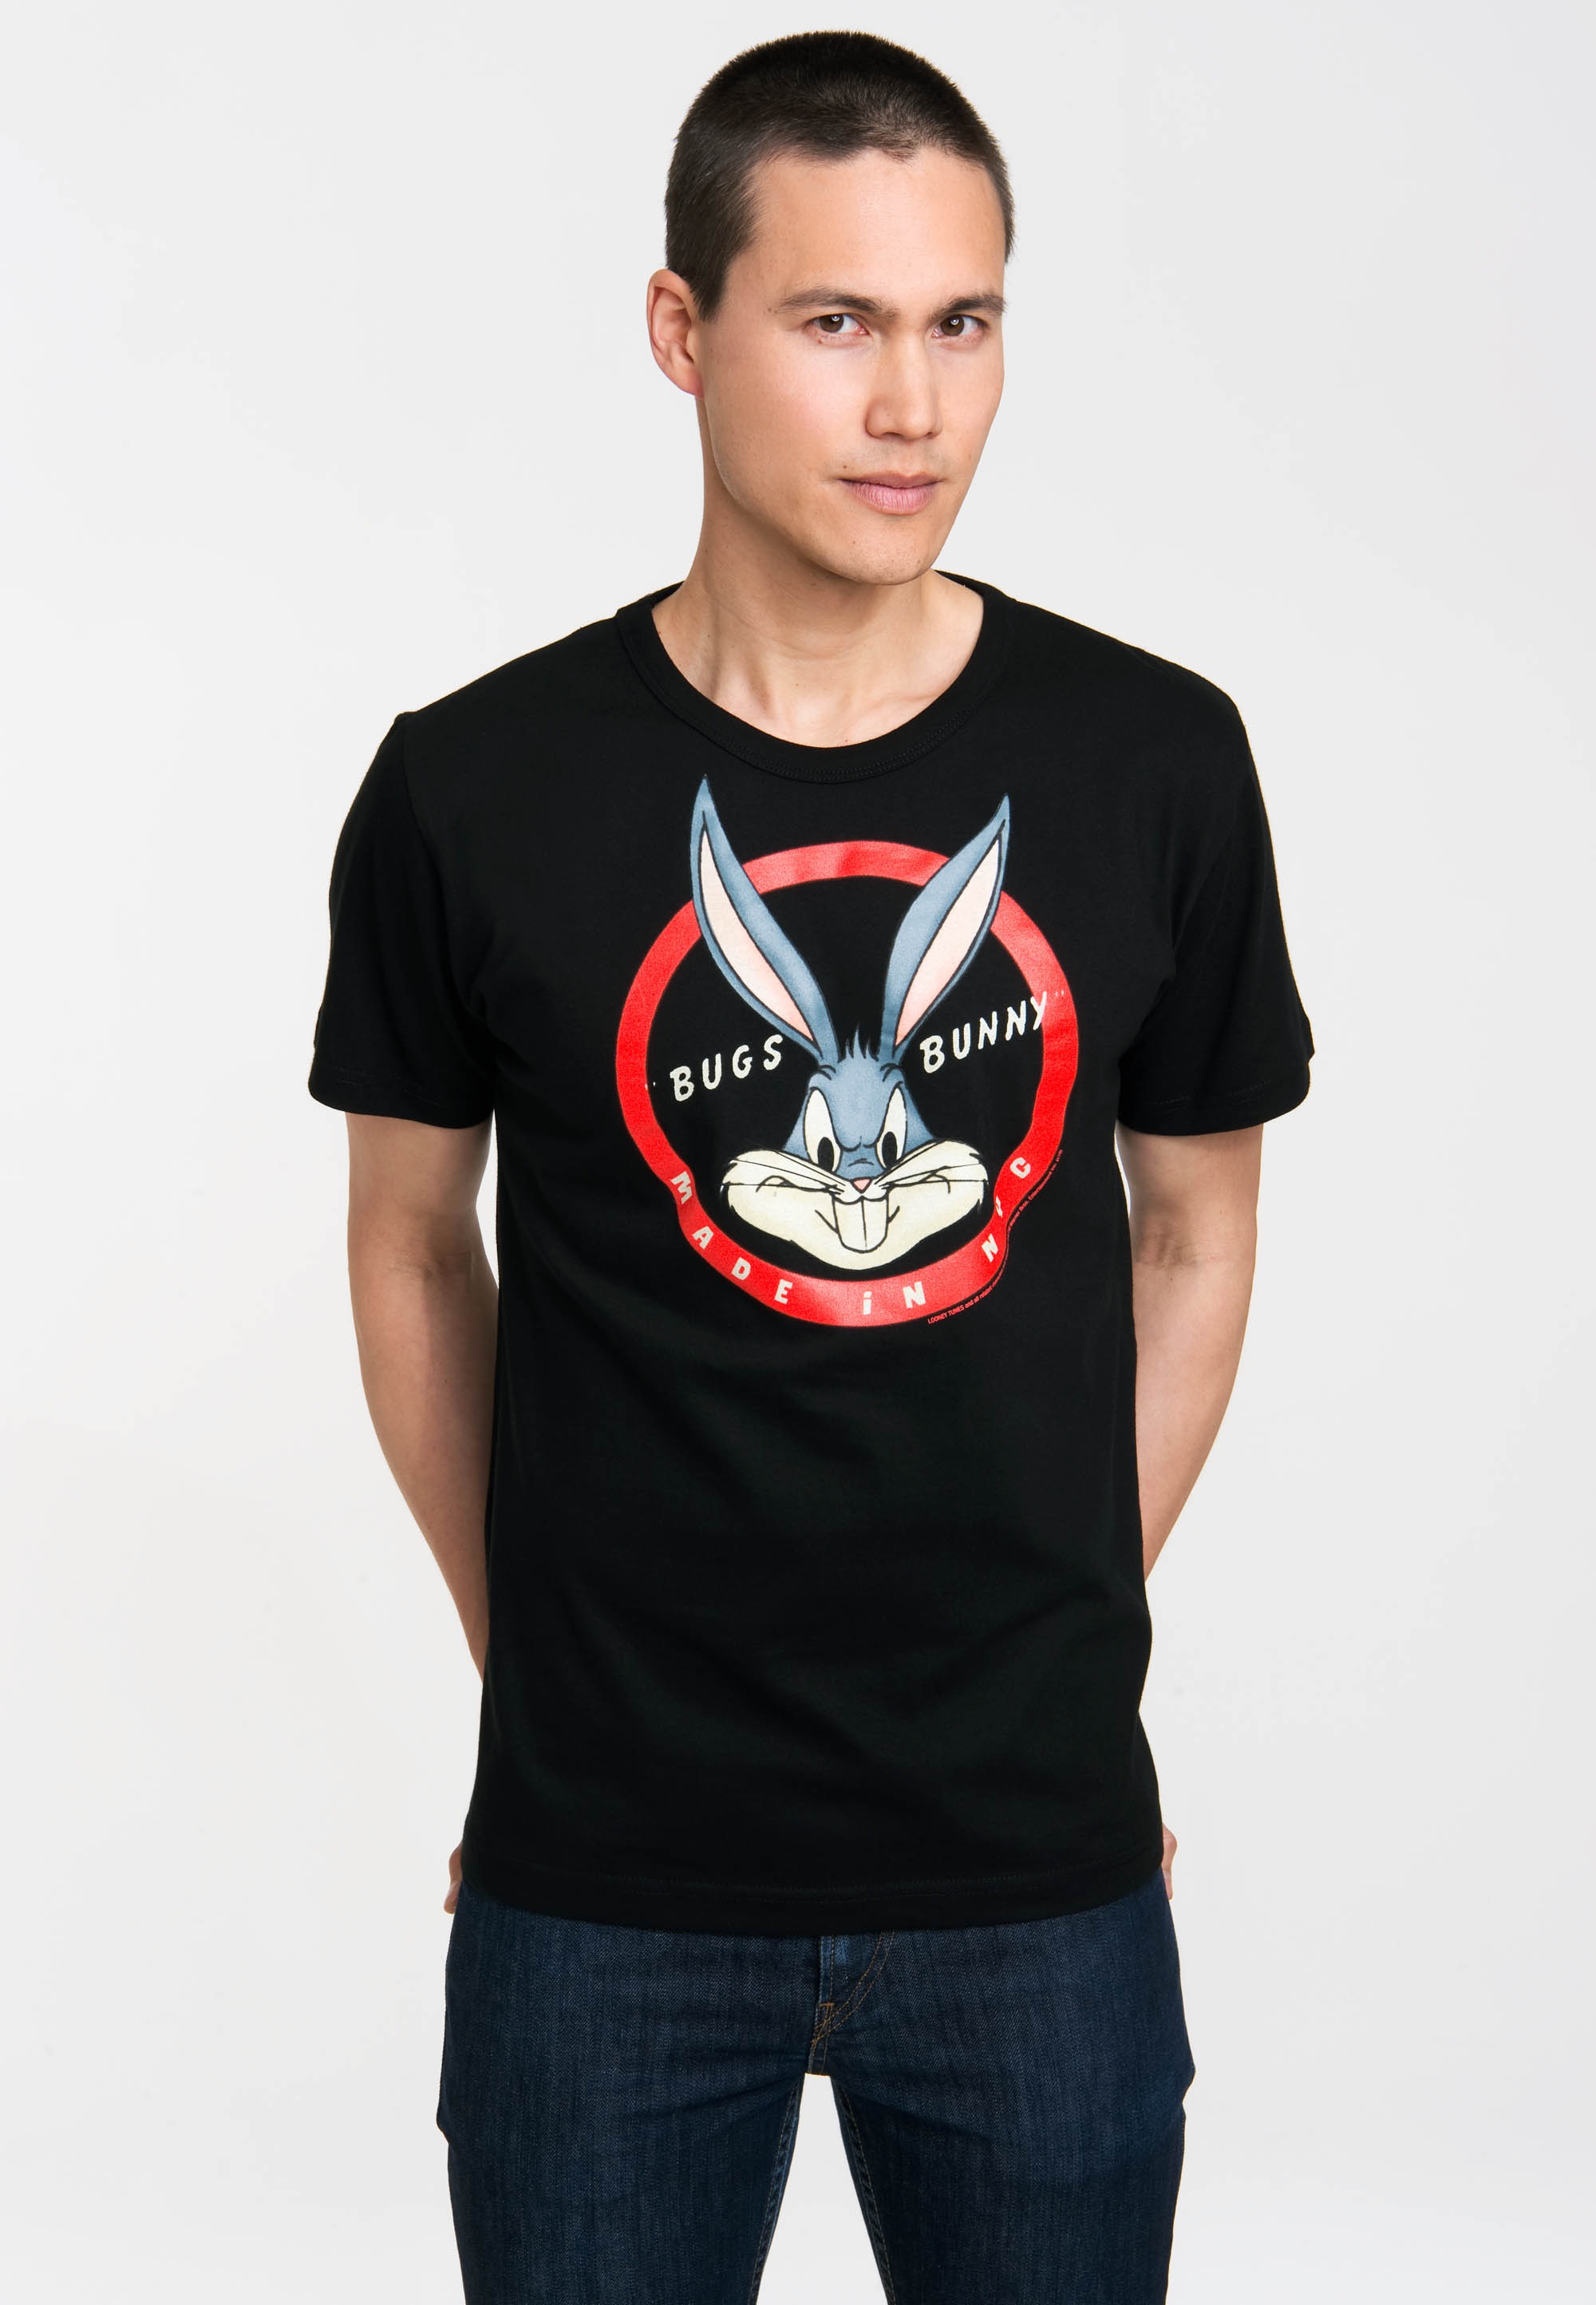 T-Shirt »Bugs Bunny Made In NYC«, mit tollem Bugs Bunny-Print